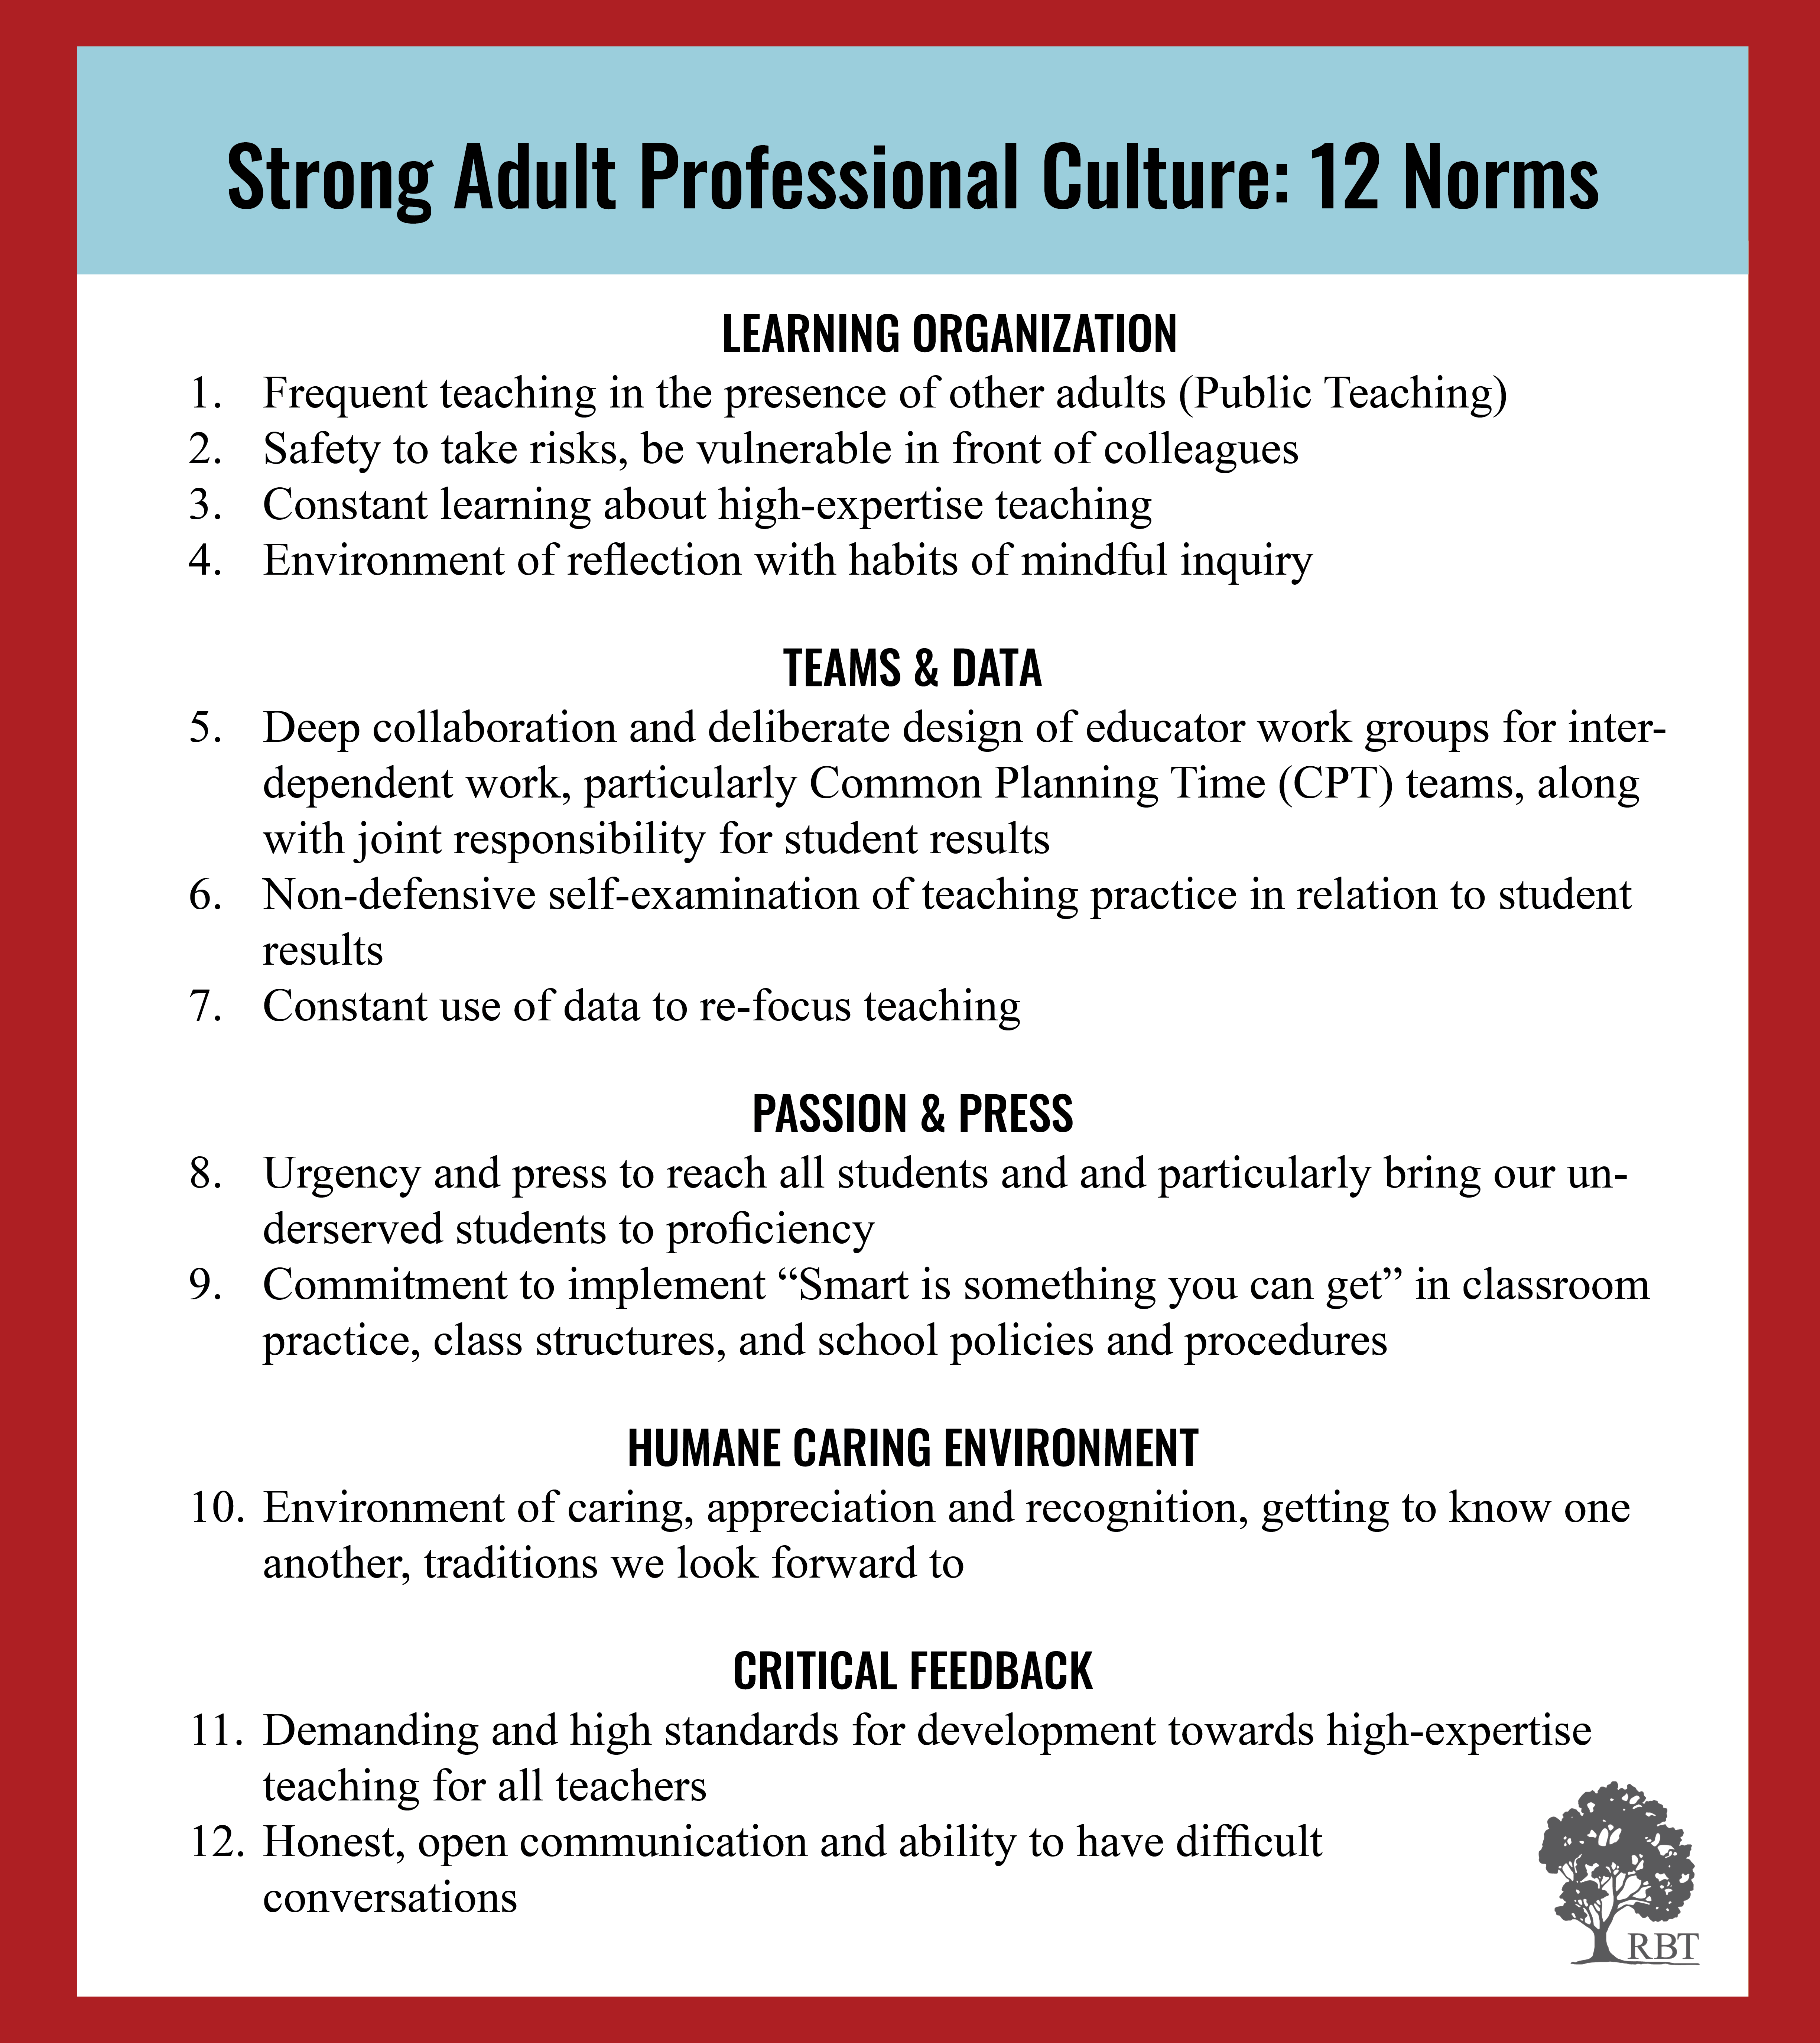 Visible Practices 12 Norms APC_5.25.21.png